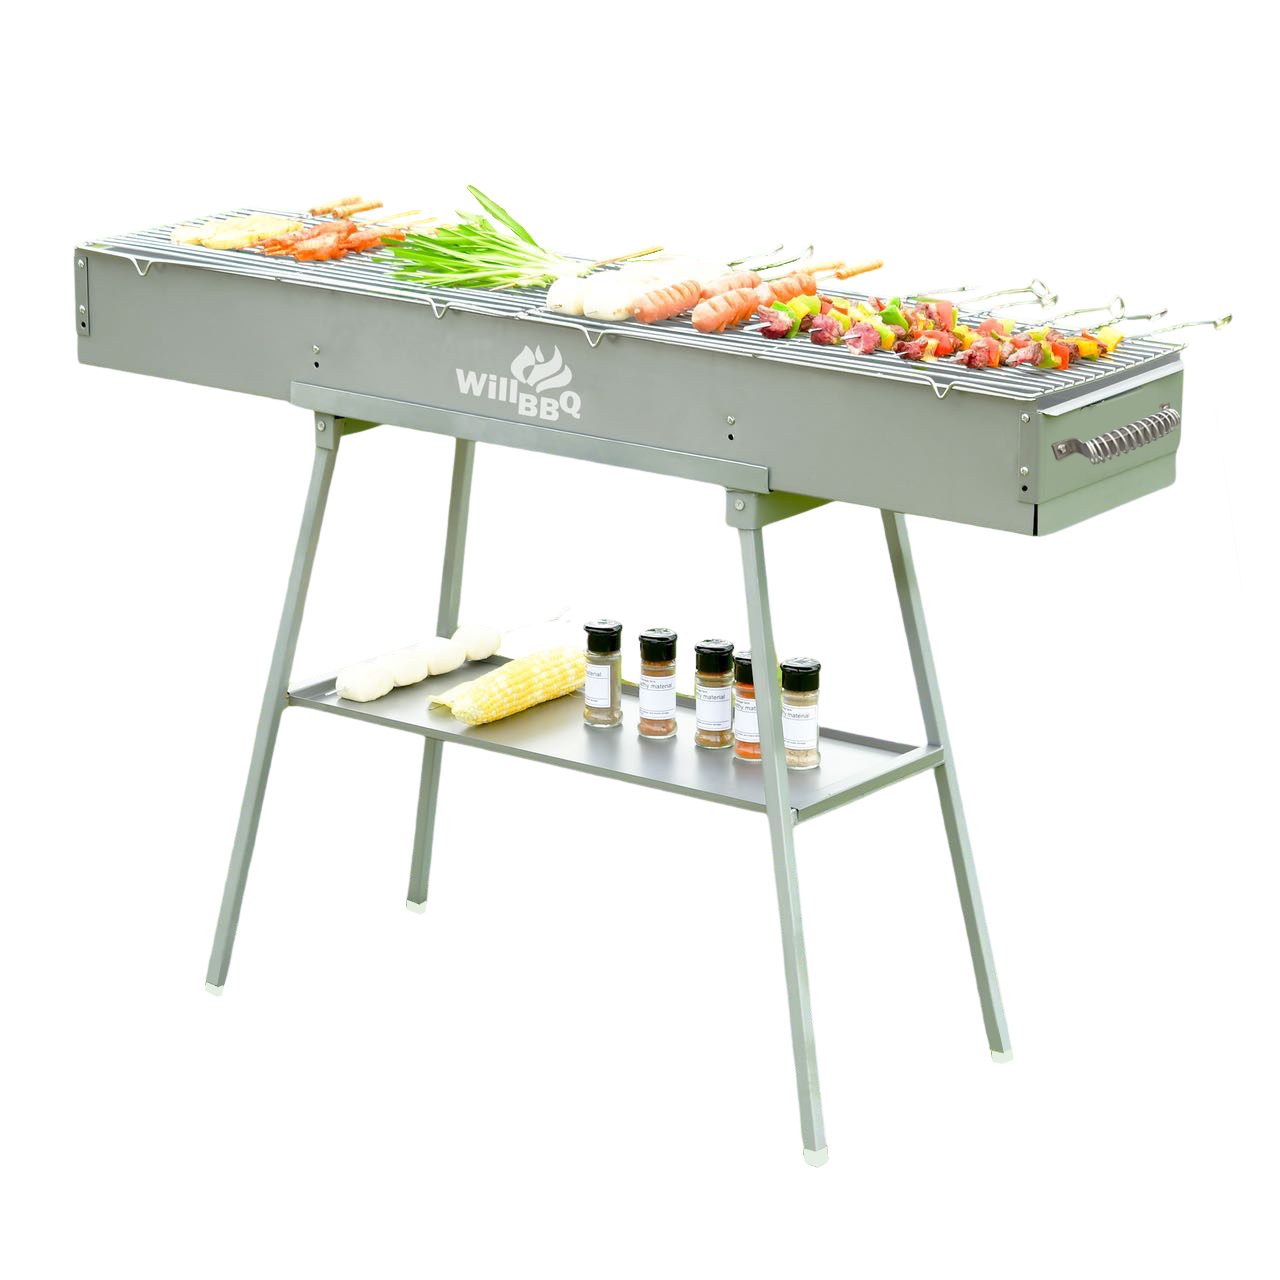 150cm x 26cm Commercial Quality Portable Charcoal Hibachi BBQ Camping Barbecue Grill